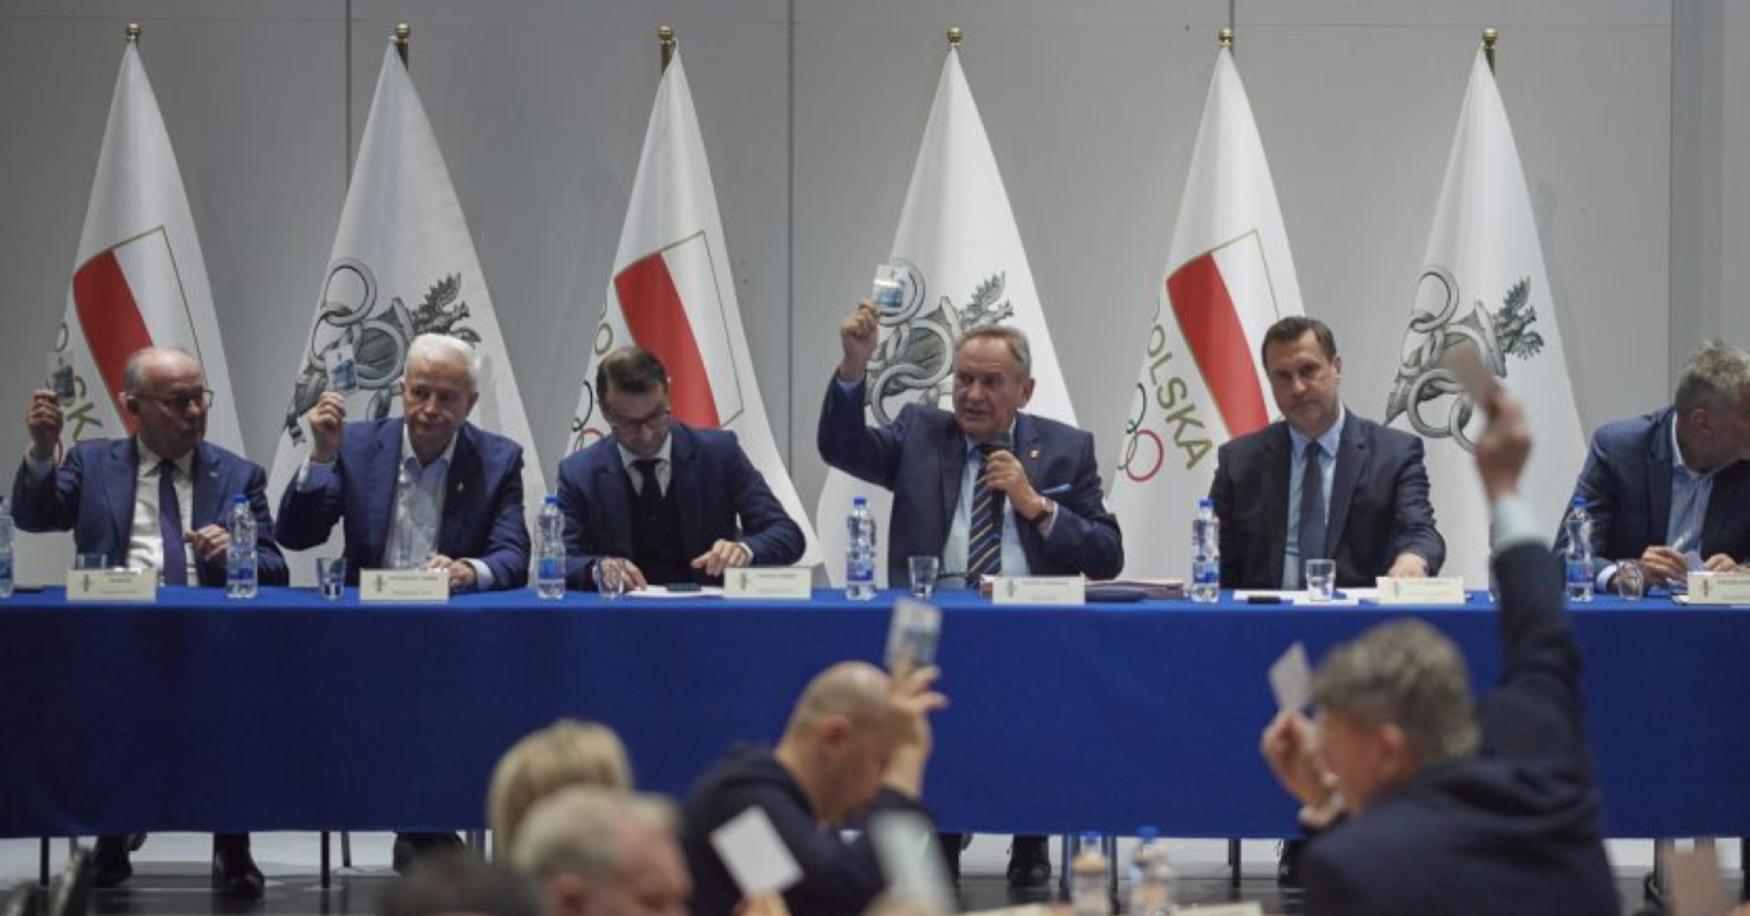 The Polish Esports Association has been accepted as an ordinary member of the Polish Olympic Committee ©PZE